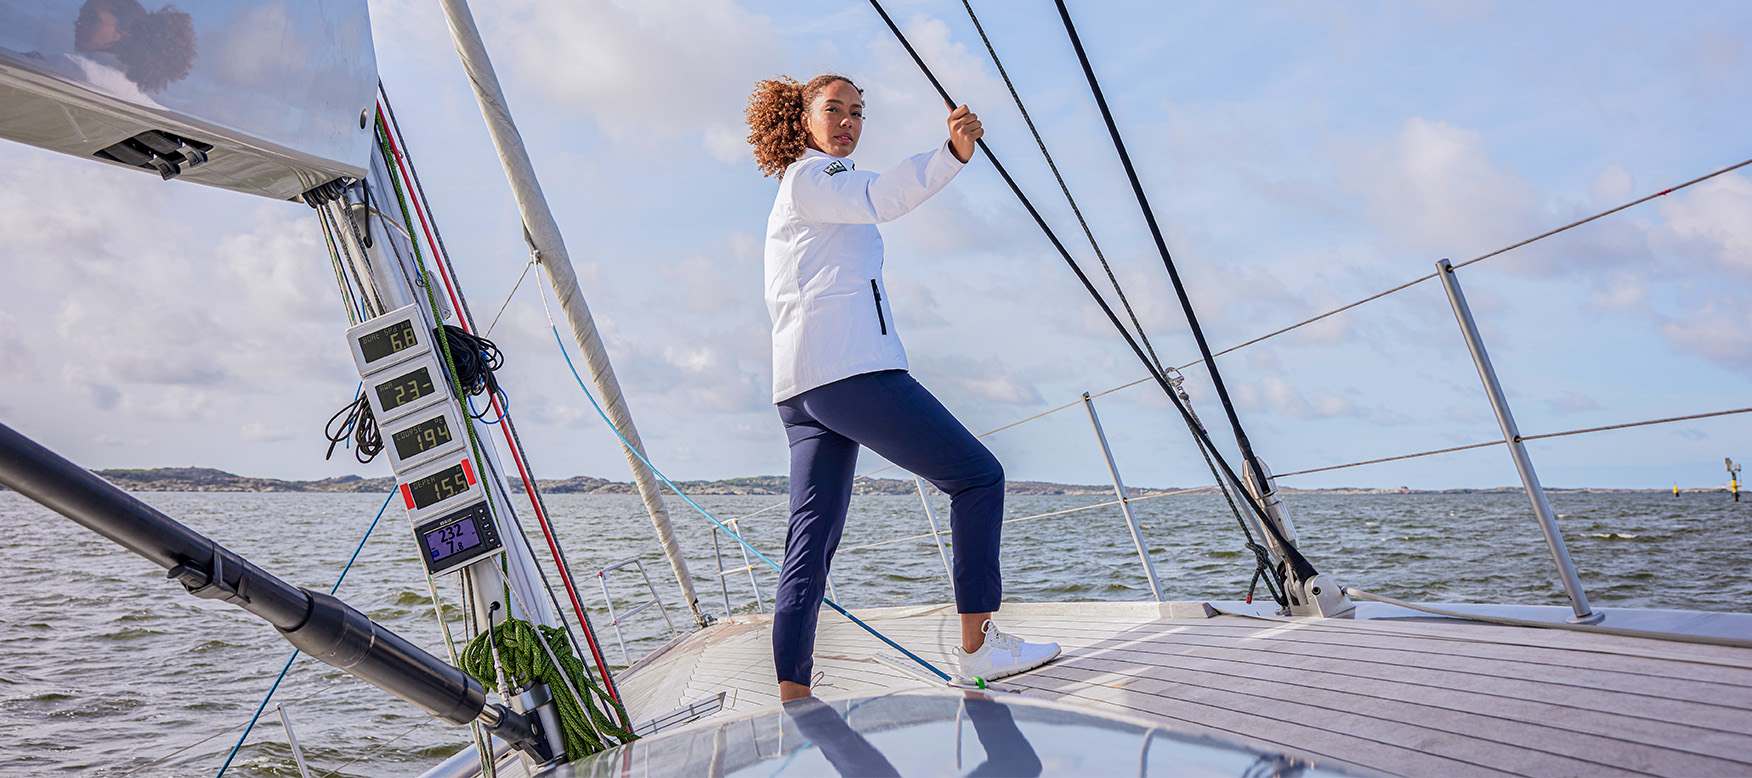 woman sailing in the Crew Midlayer 2.0 jacket